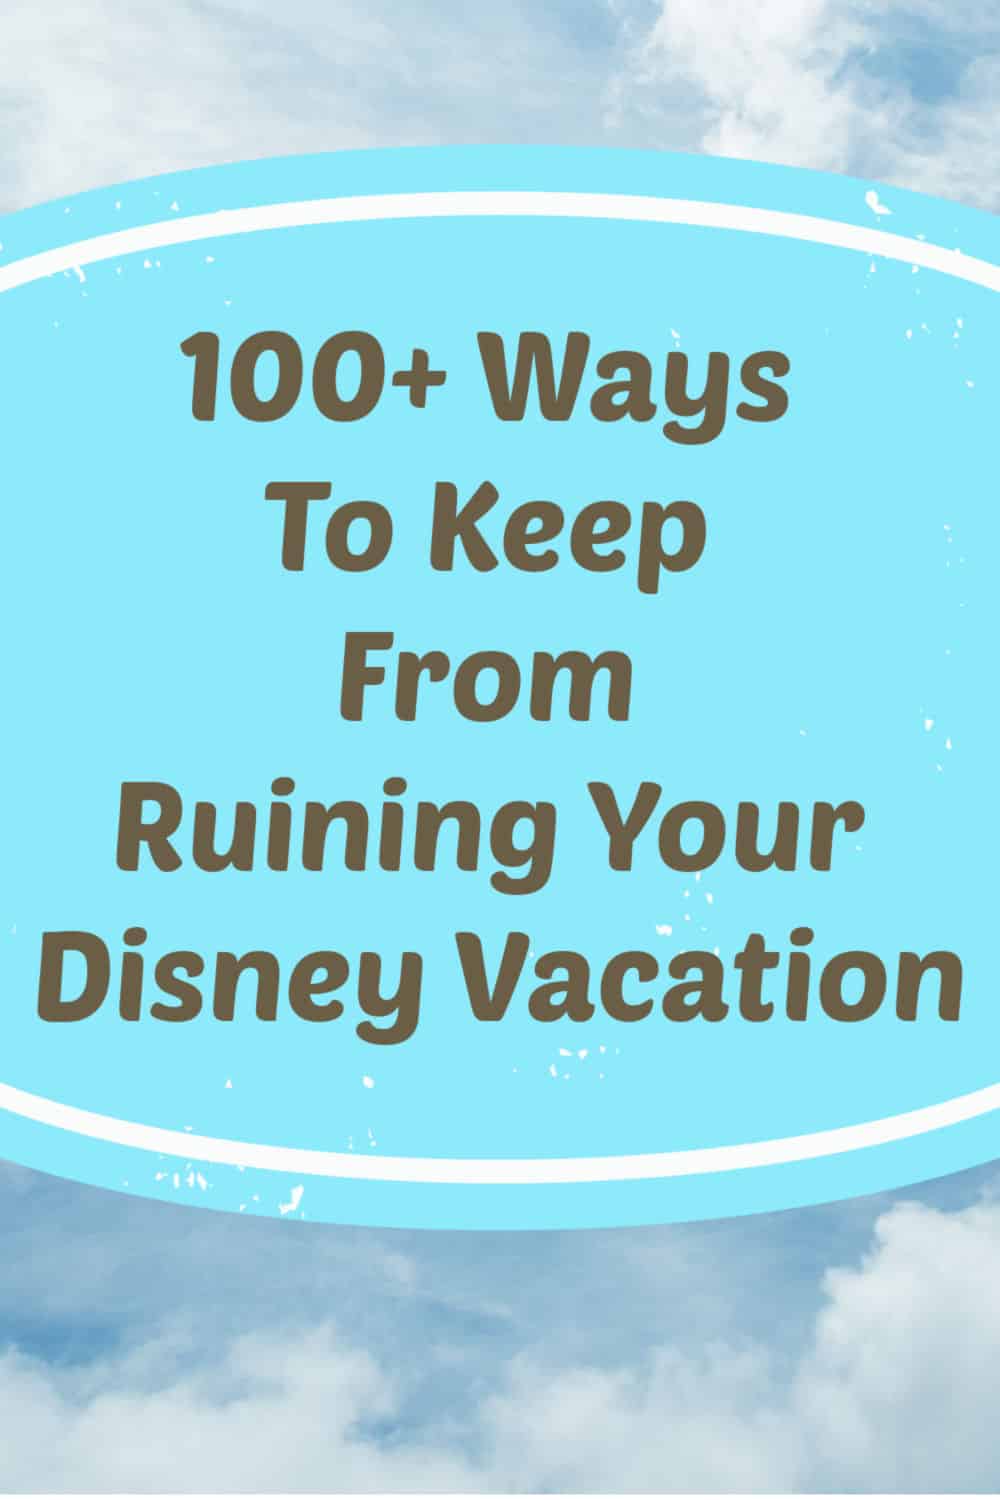 100 plus ways to keep from ruining your Disney vacation